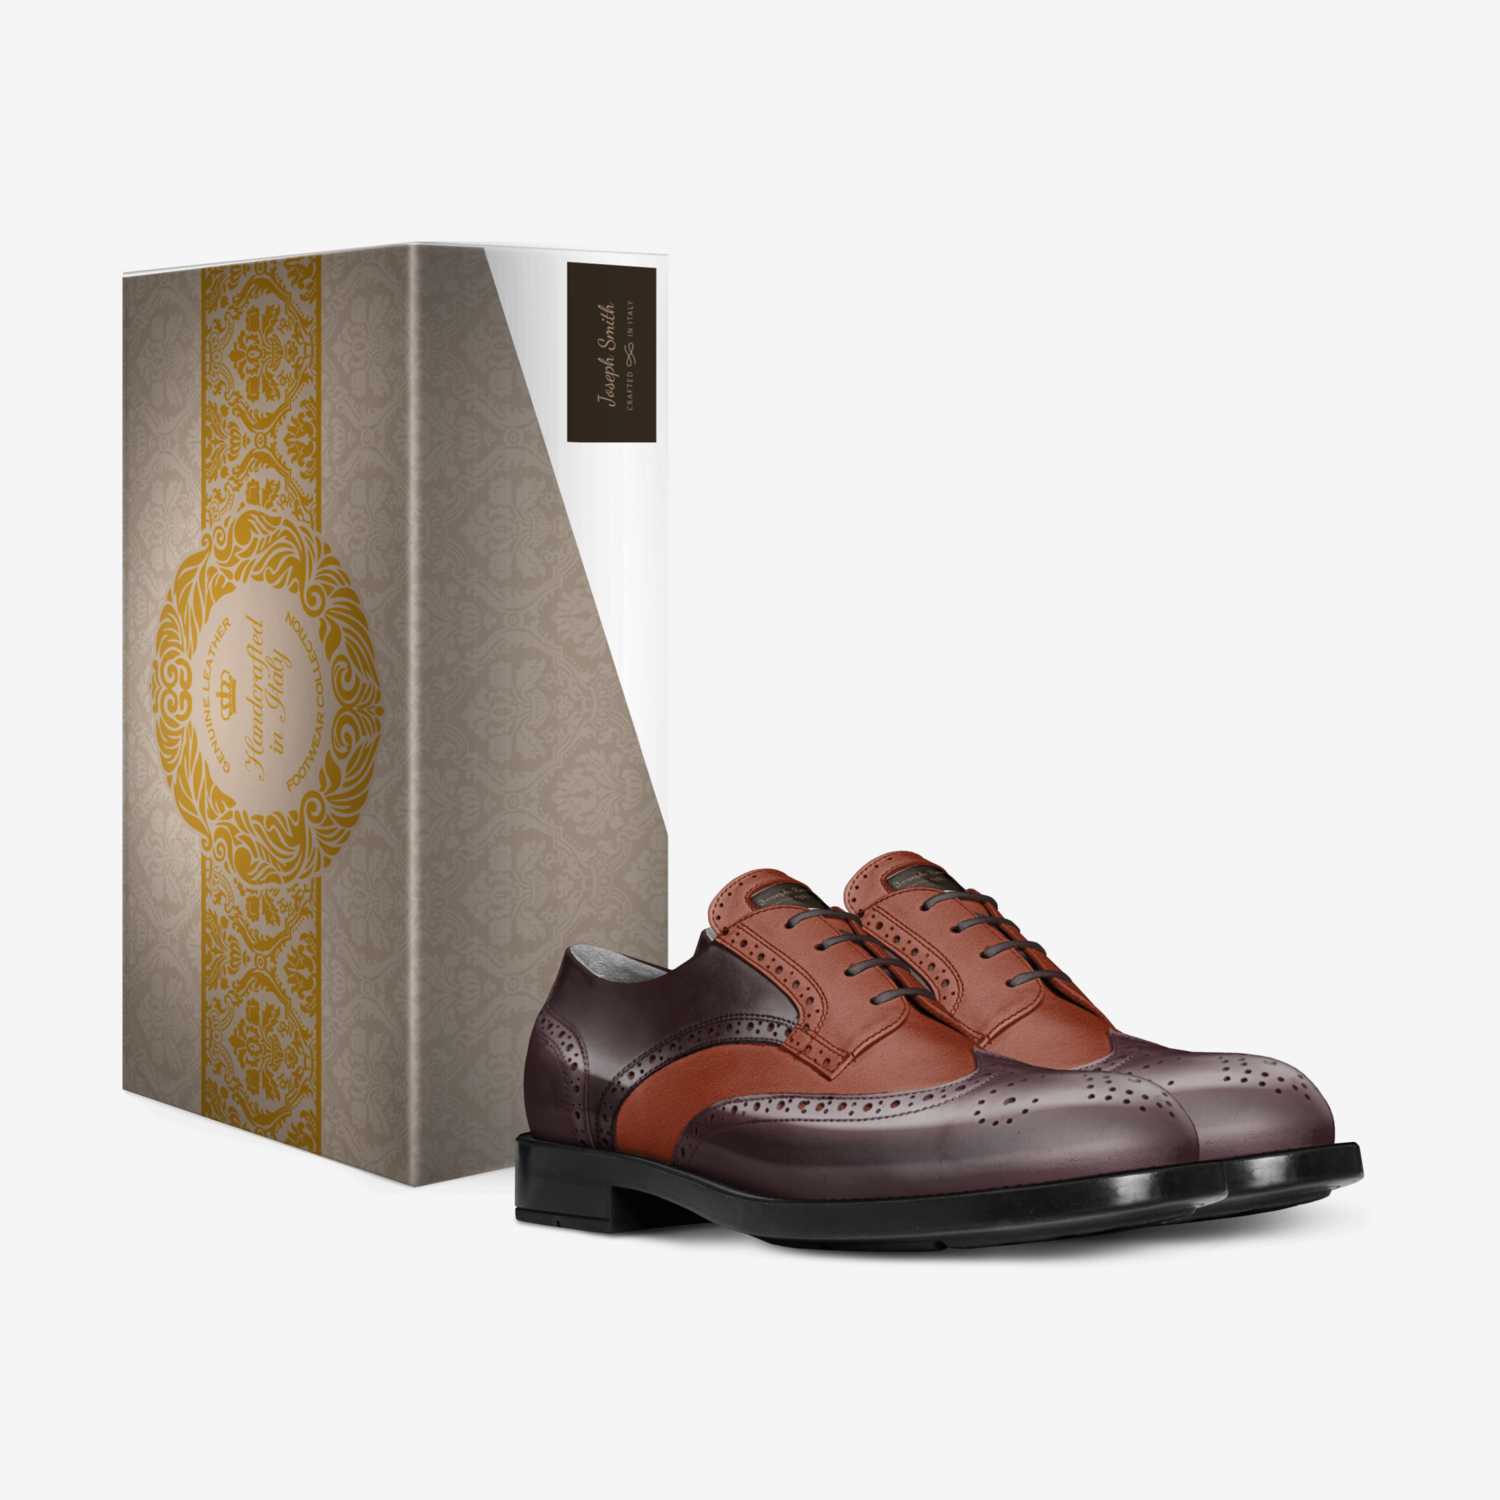 Gentlemen custom made in Italy shoes by Joseph Smith | Box view